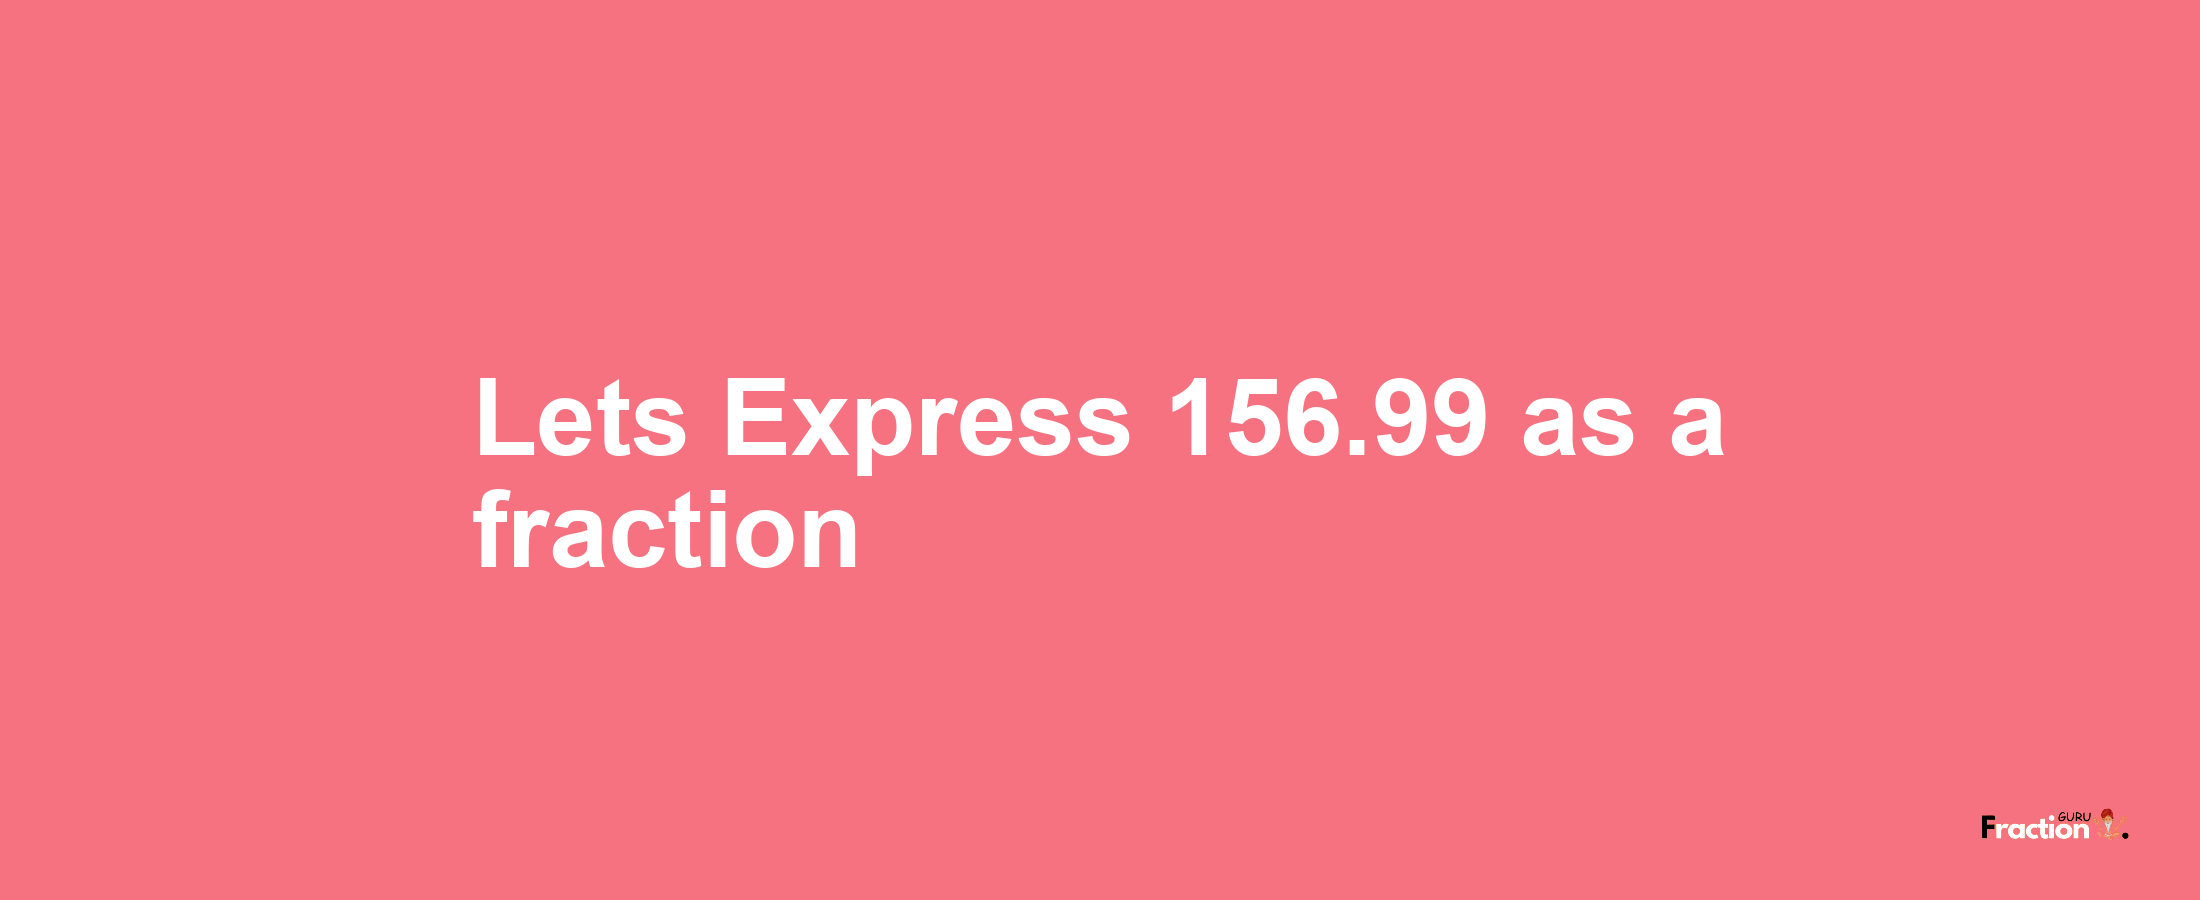 Lets Express 156.99 as afraction